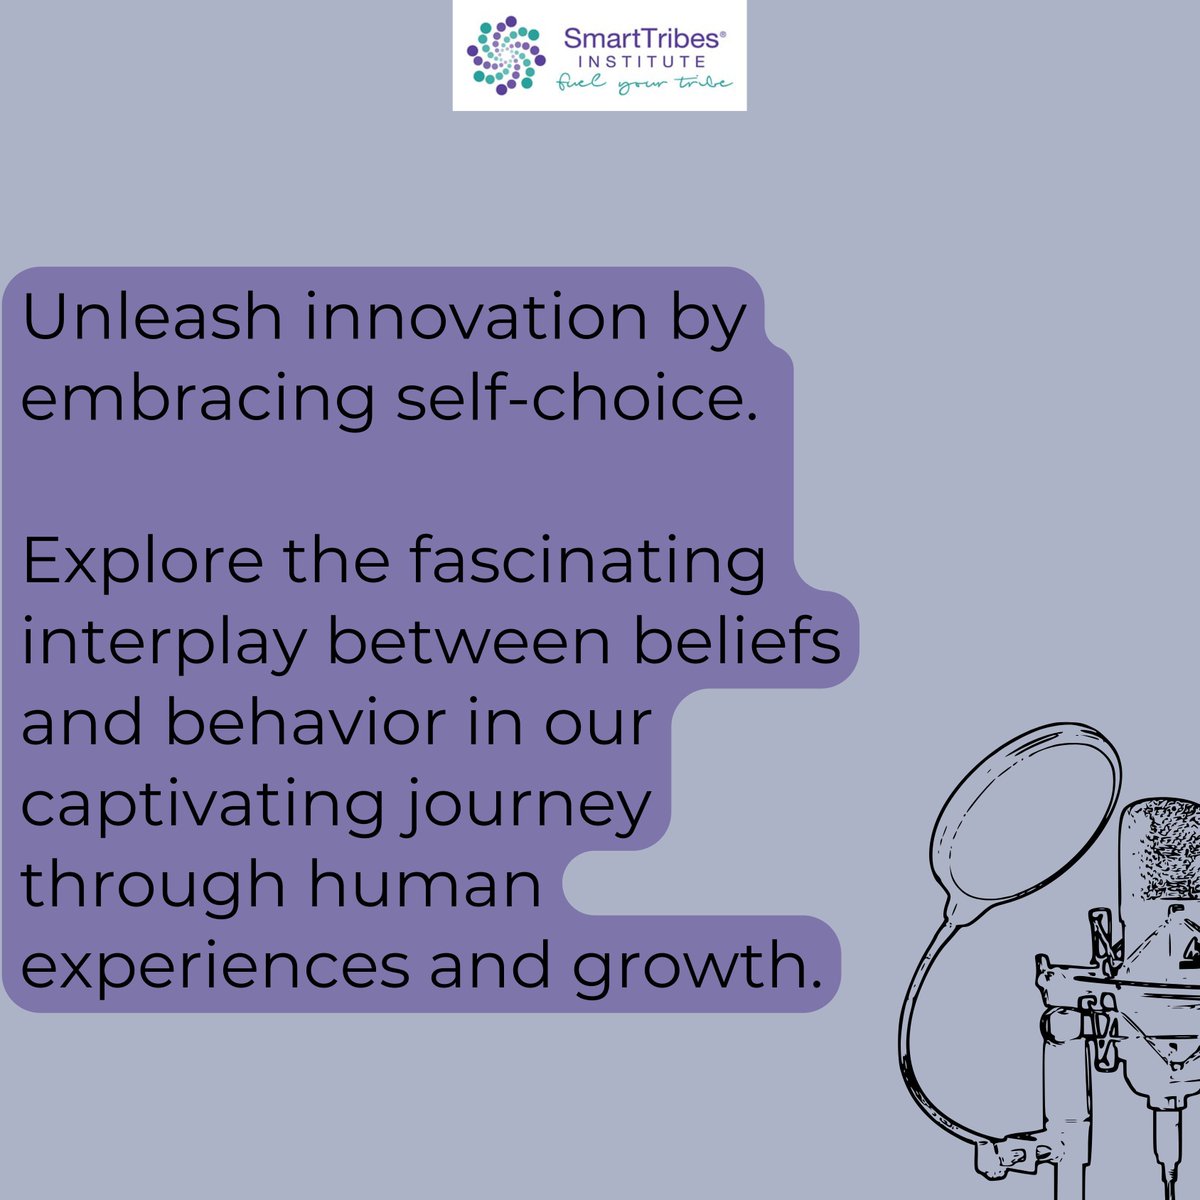 Experience the dynamic interplay of beliefs and behavior in our journey through human growth and innovation. Delve into captivating insights on self-choice and collaboration. Join us for thought-provoking discussions on our podcast: buff.ly/4aTmoTq #ChooseYourself